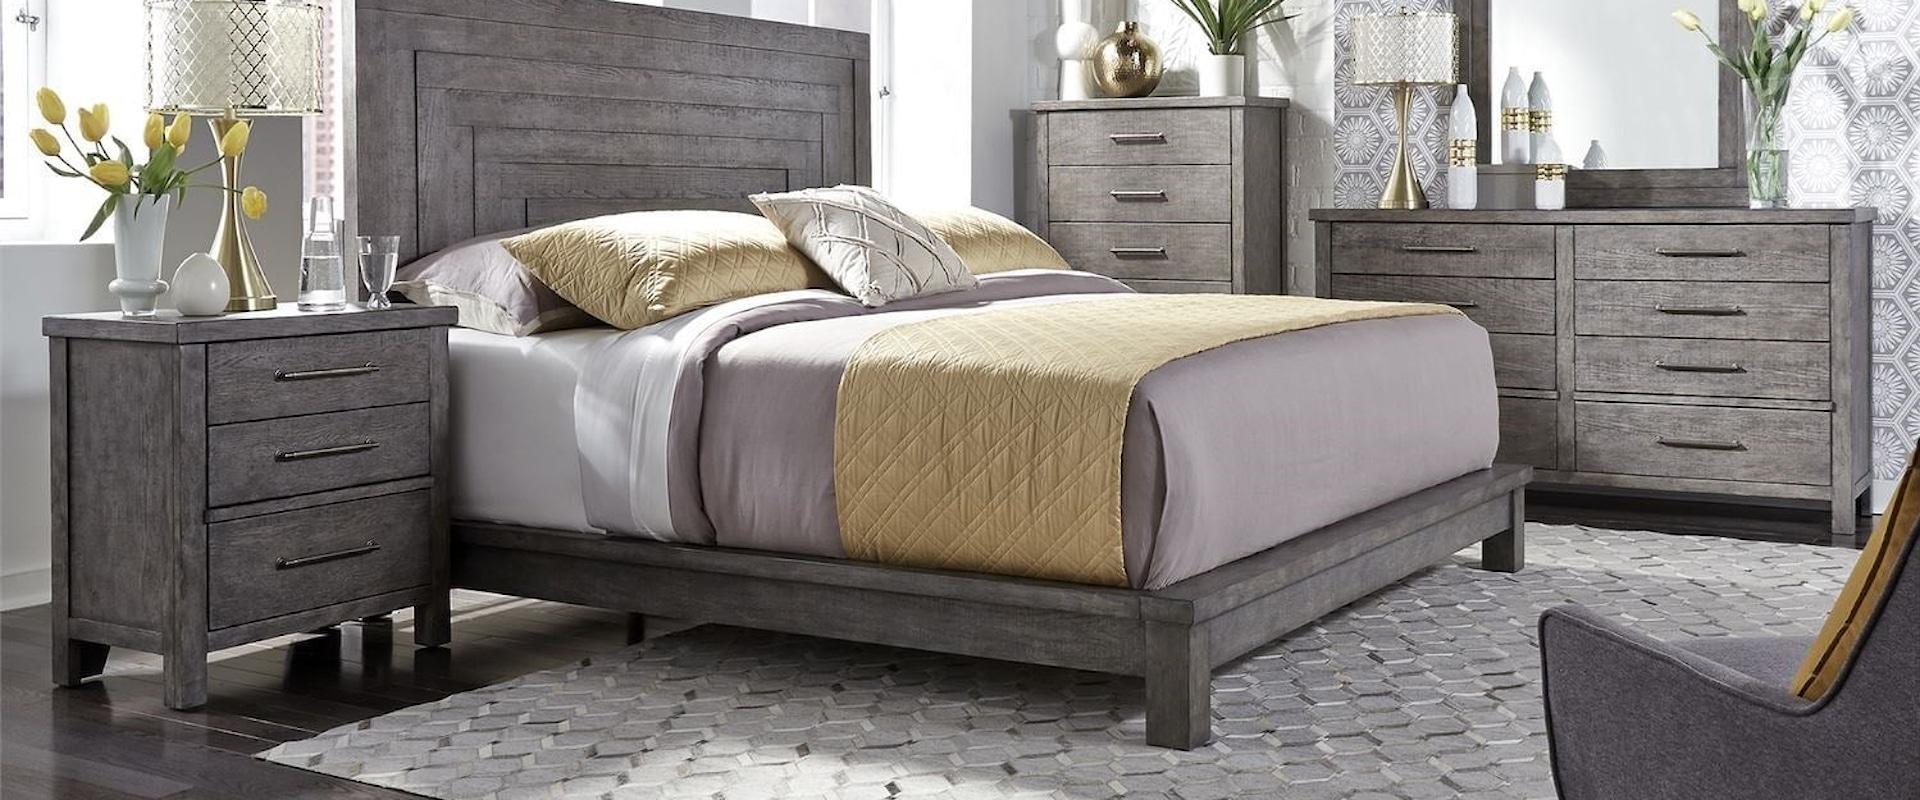 Contemporary 5-Piece King Bedroom Group